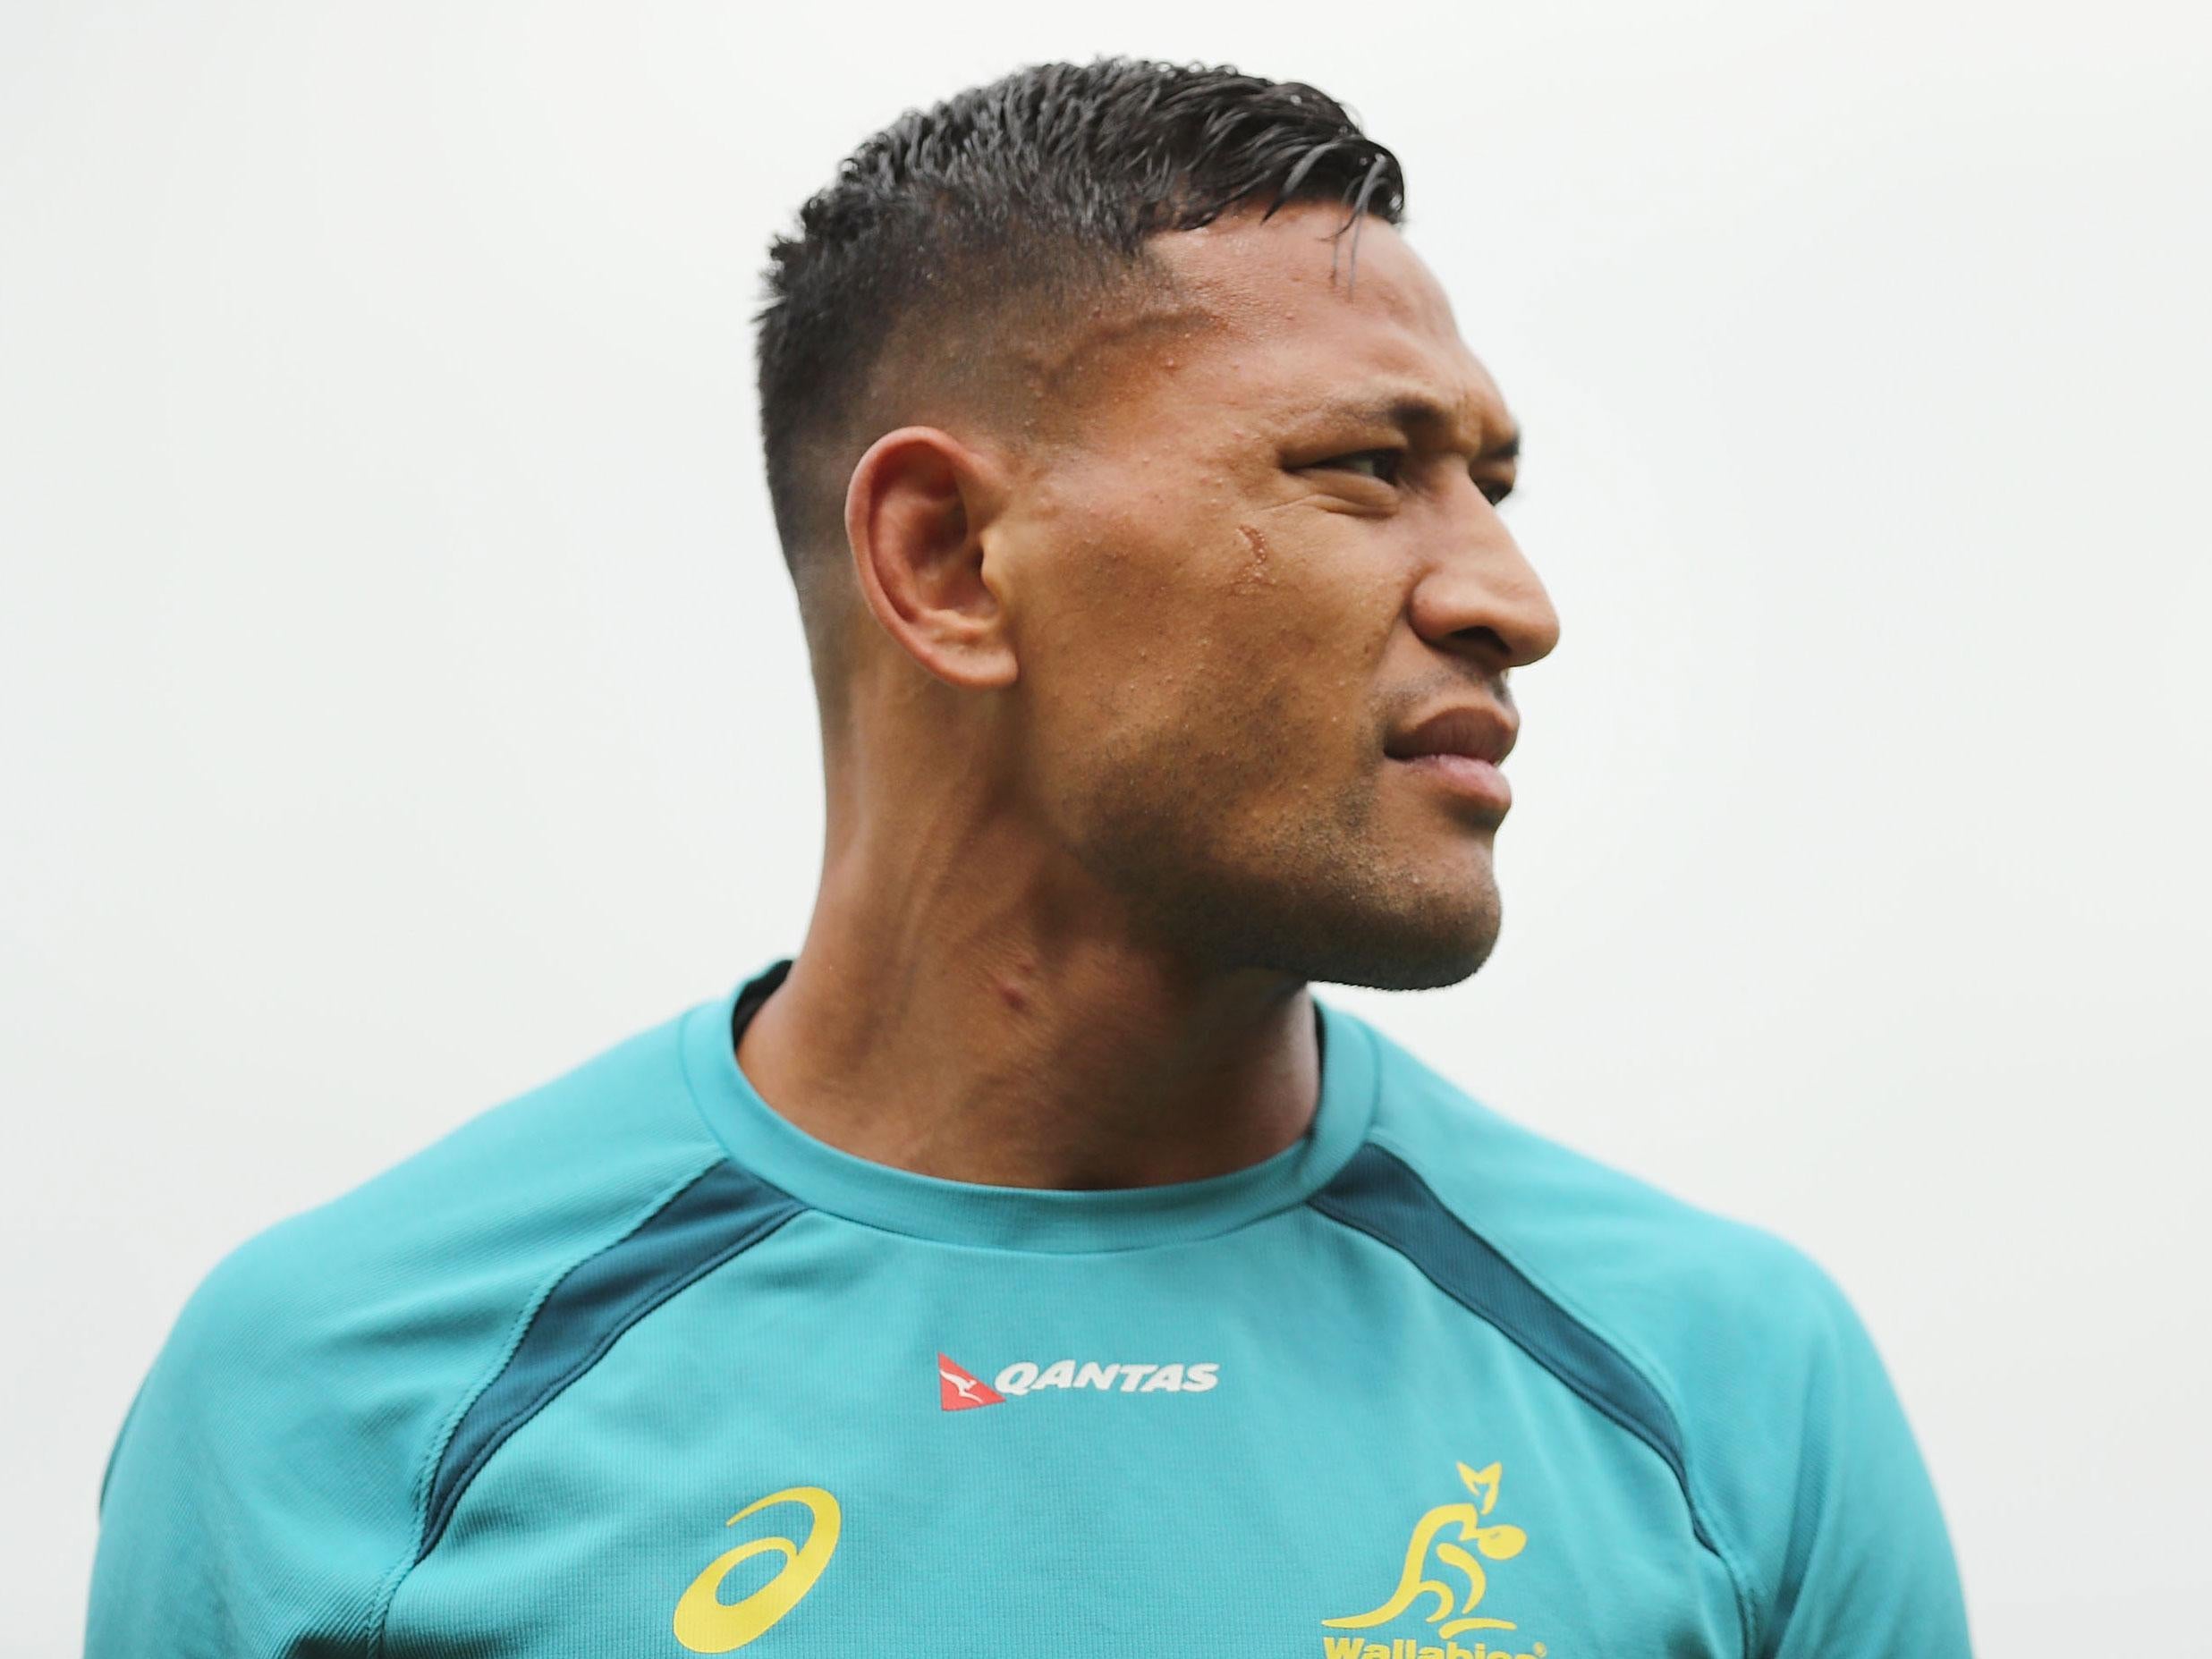 Folau previously spoke out against the introduction of same-sex marriage in Australia